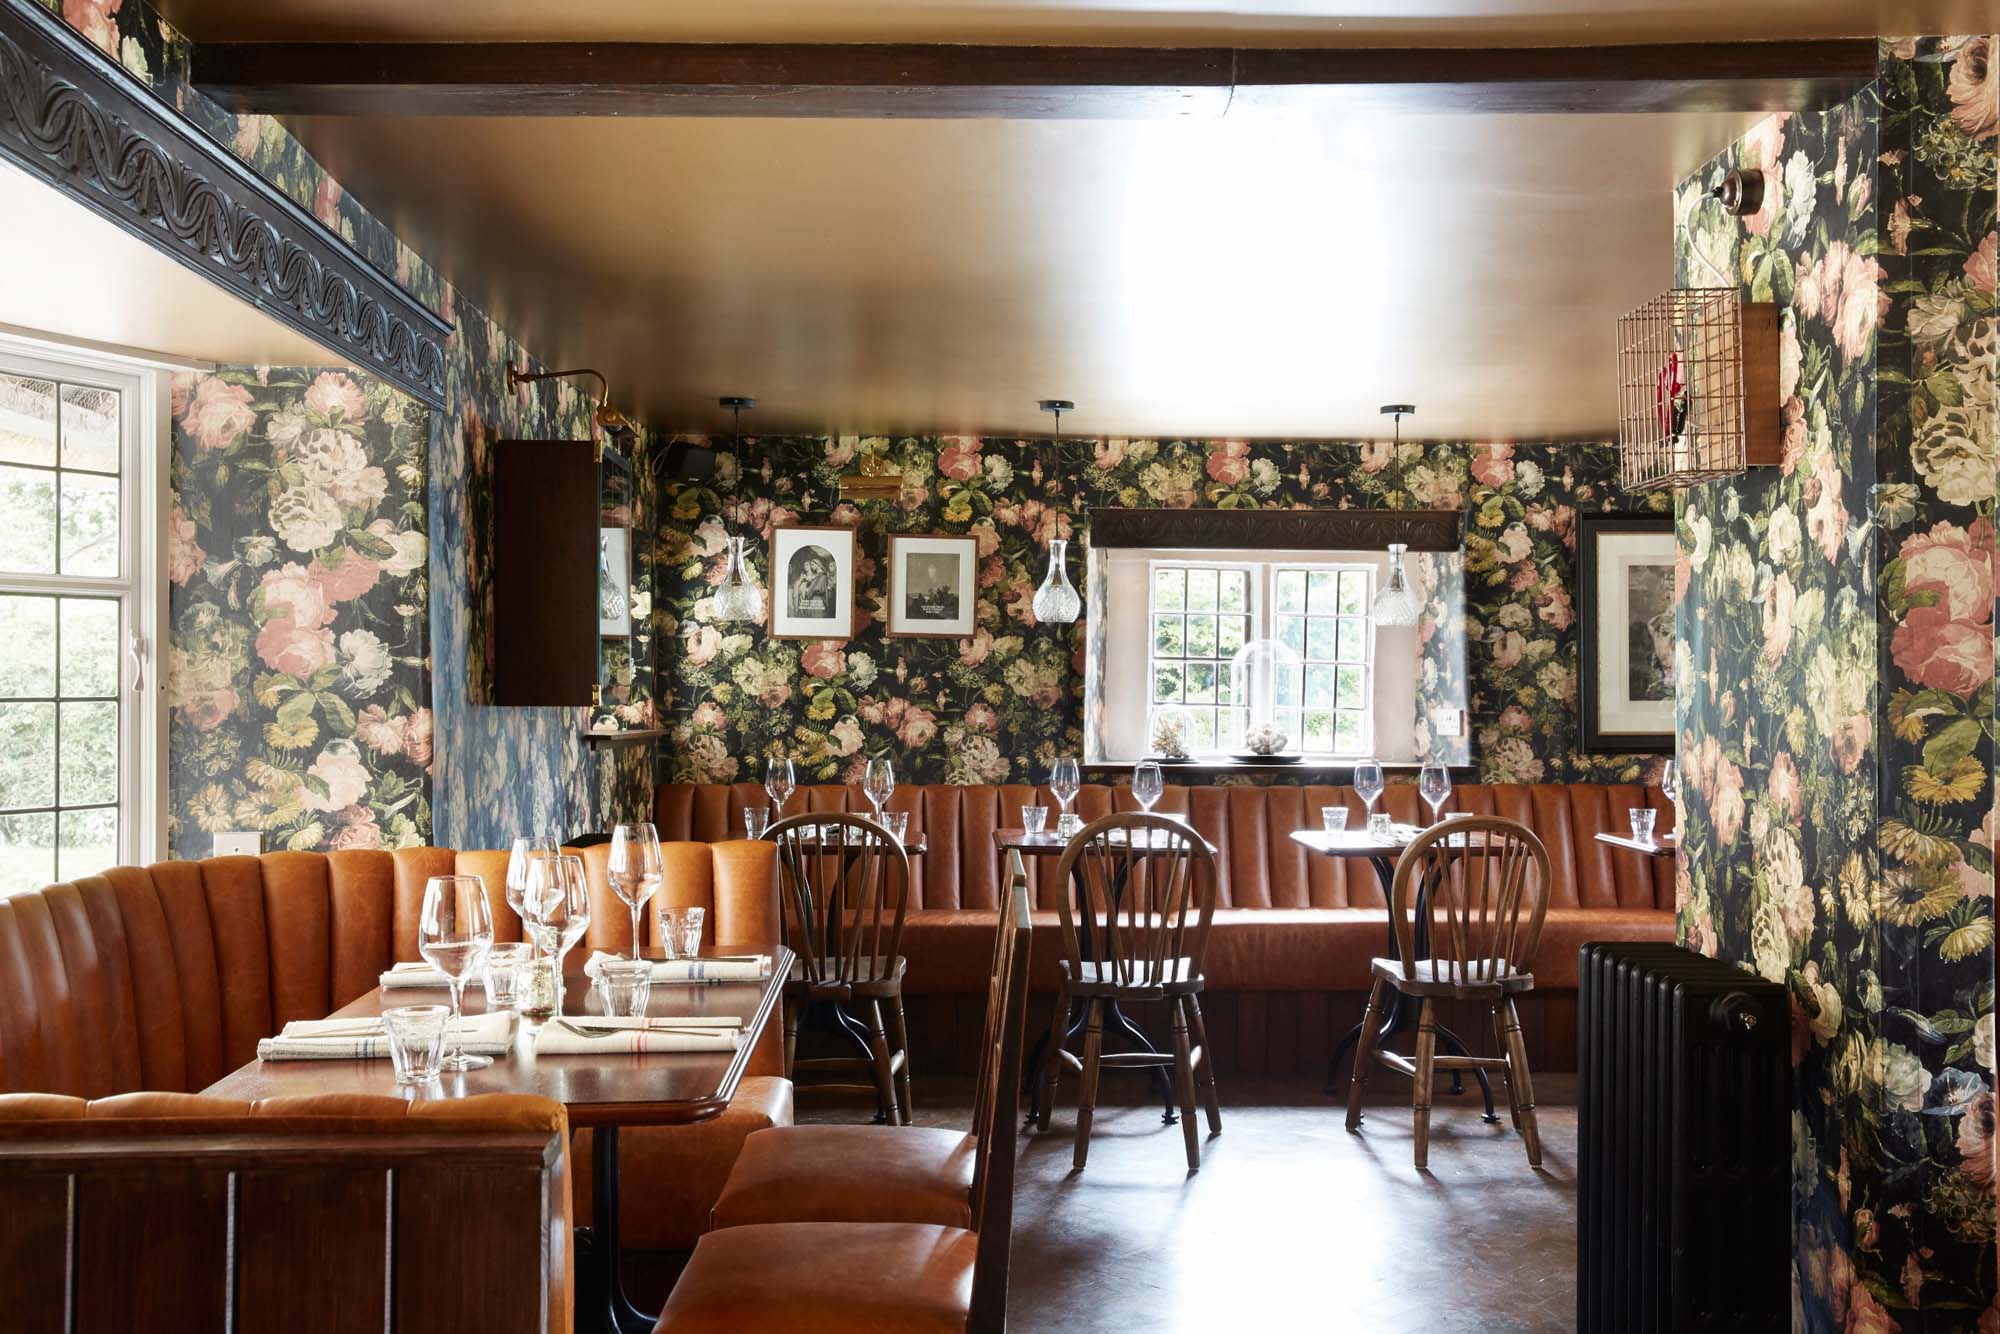 Mr Hanbury's Arms with wallpaper by House of Hackney